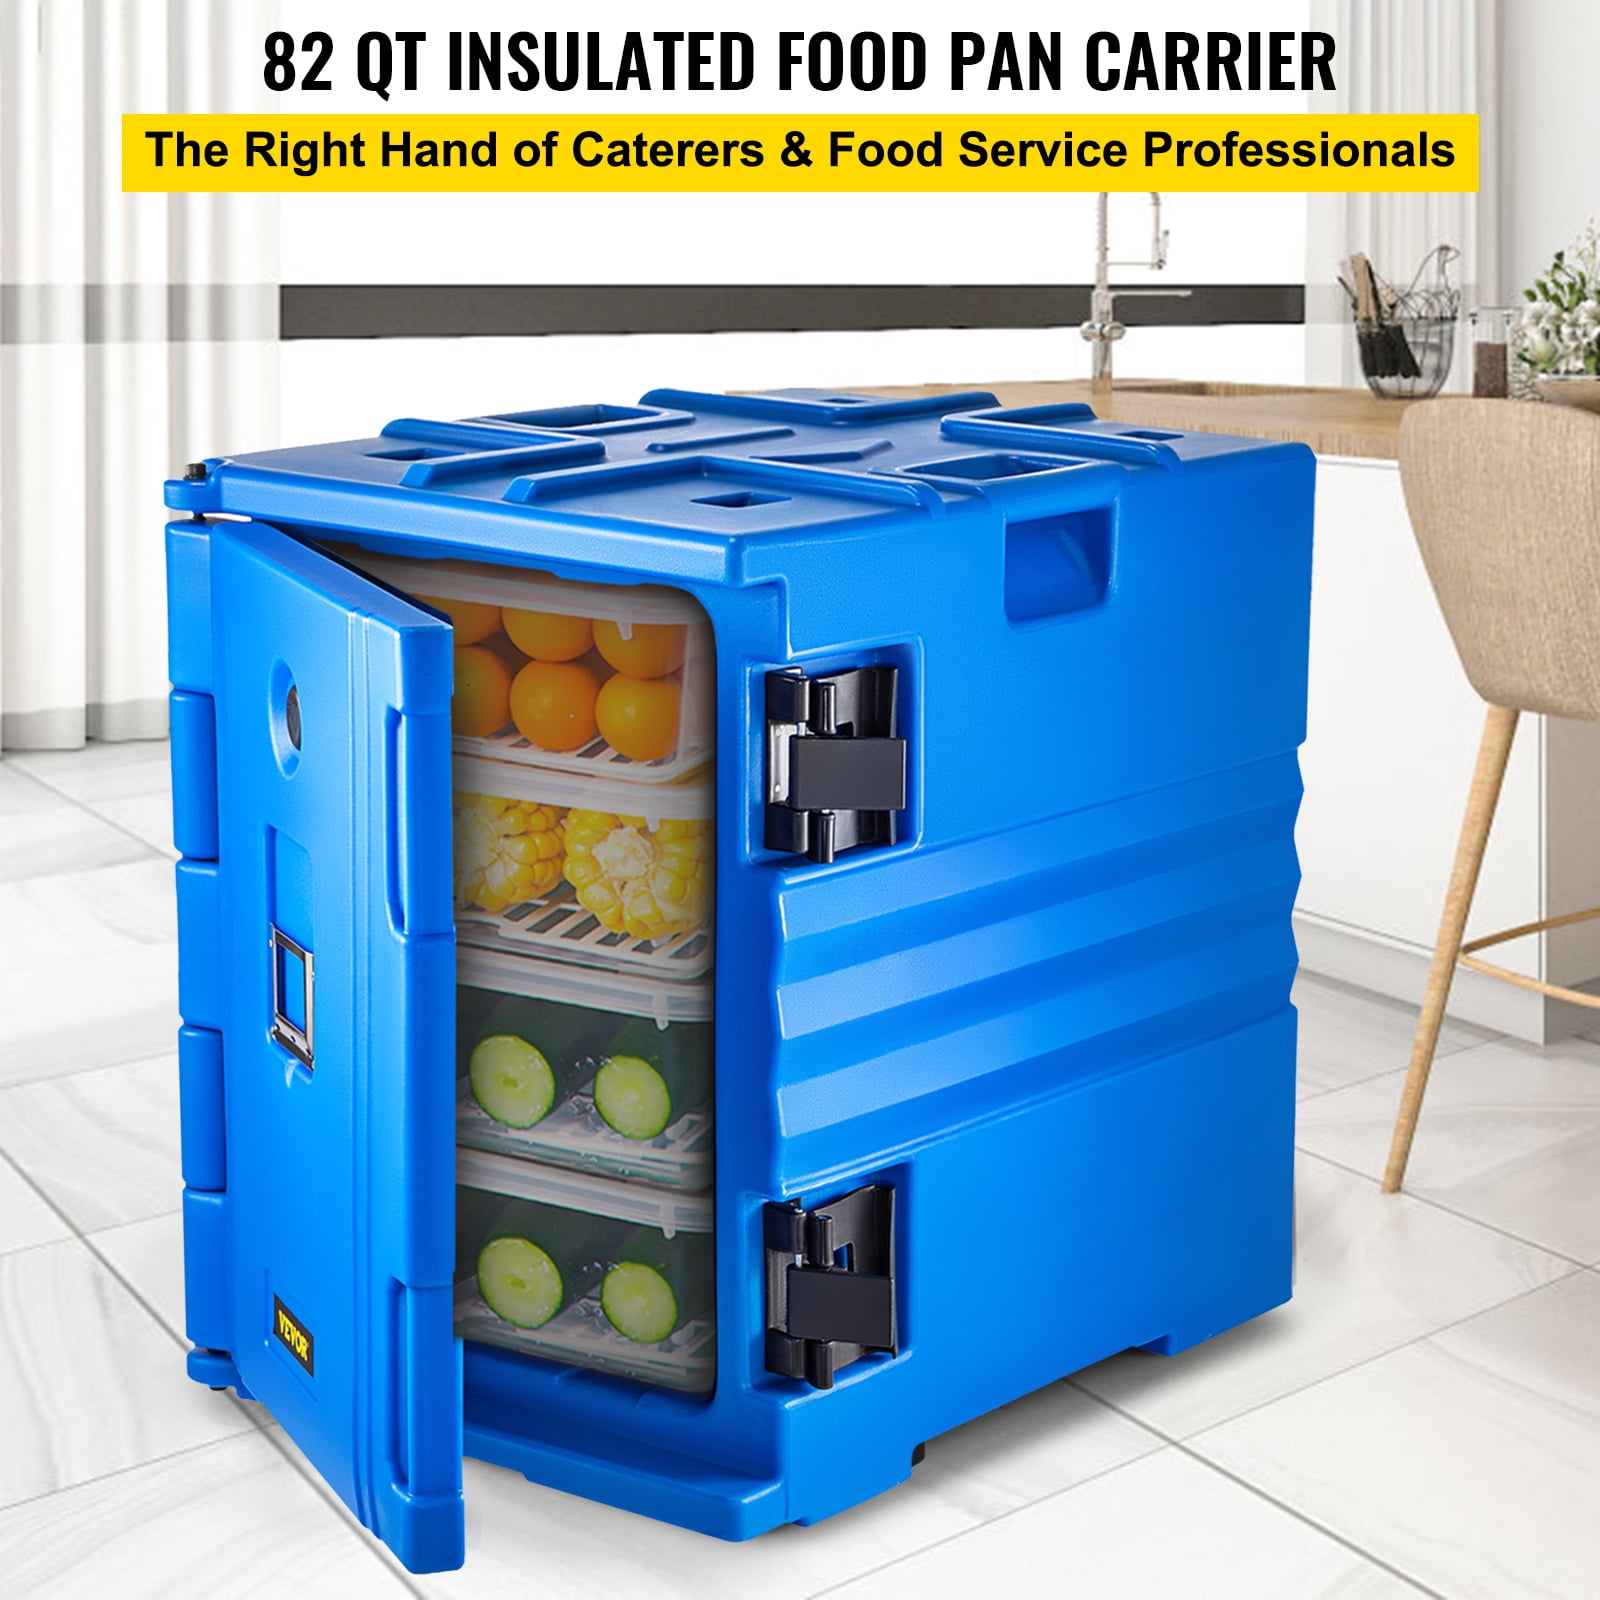 VEVOR Insulated Food Pan Carrier, 82 qt Hot Box for Catering, LLDPE Food Box Carrier w/One-Piece Buckle, Front Loading Food Wa